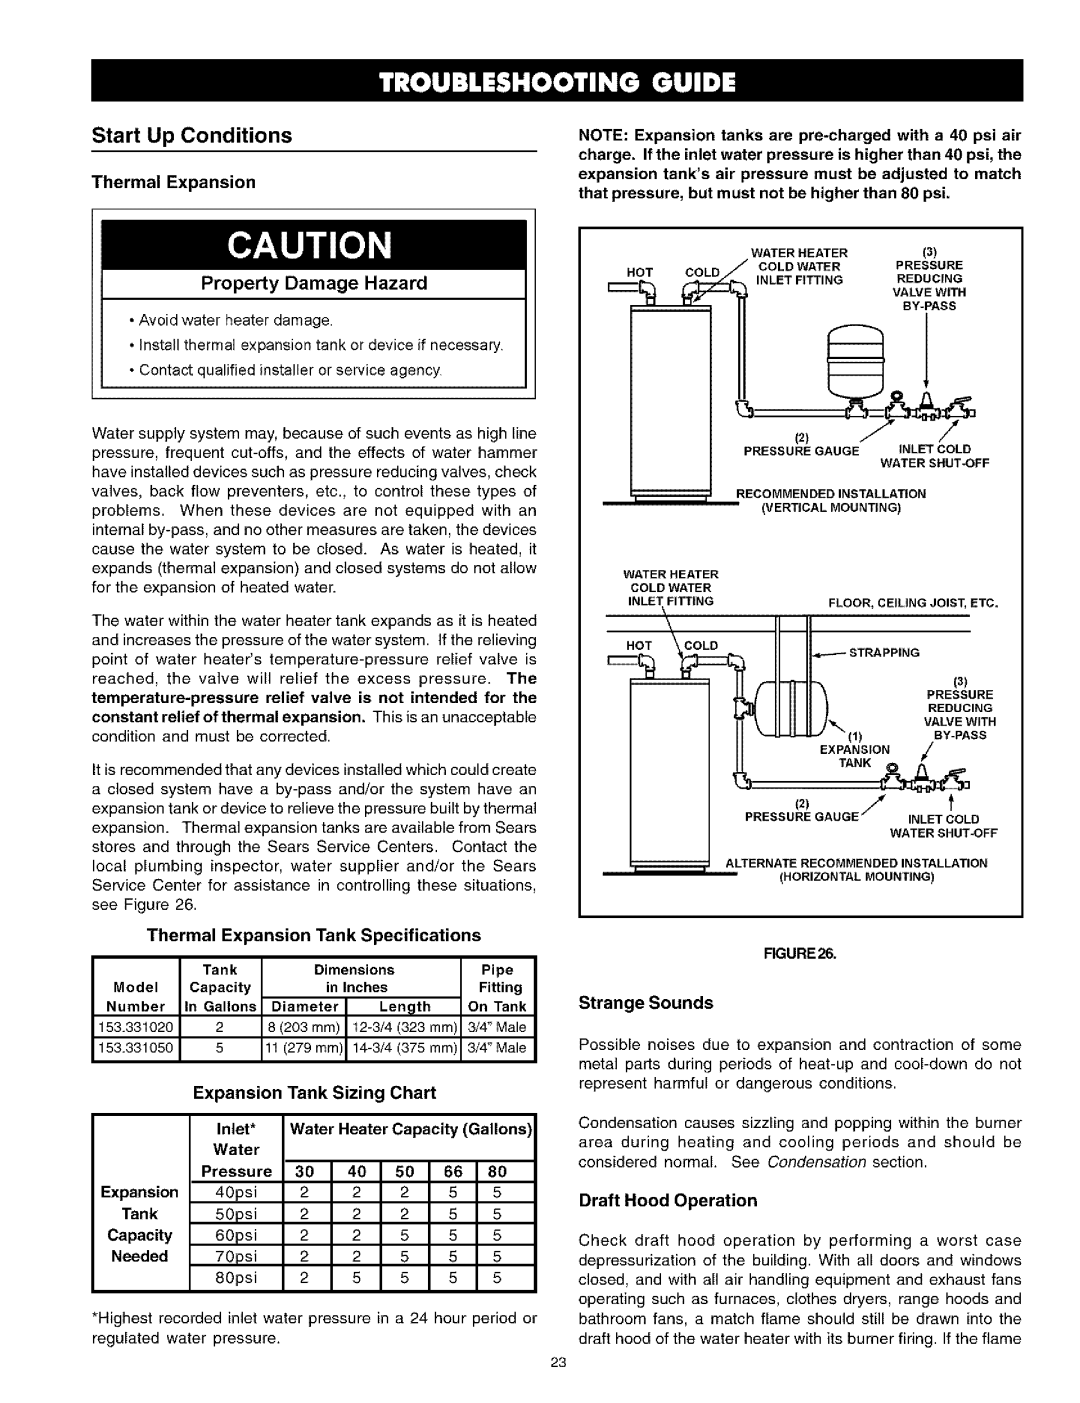 Kenmore 153.336465, 336801 HA, 336901 HA, 761 Start Up Conditions, Thermal Expansion, Expansion Tank Sizing Chart 